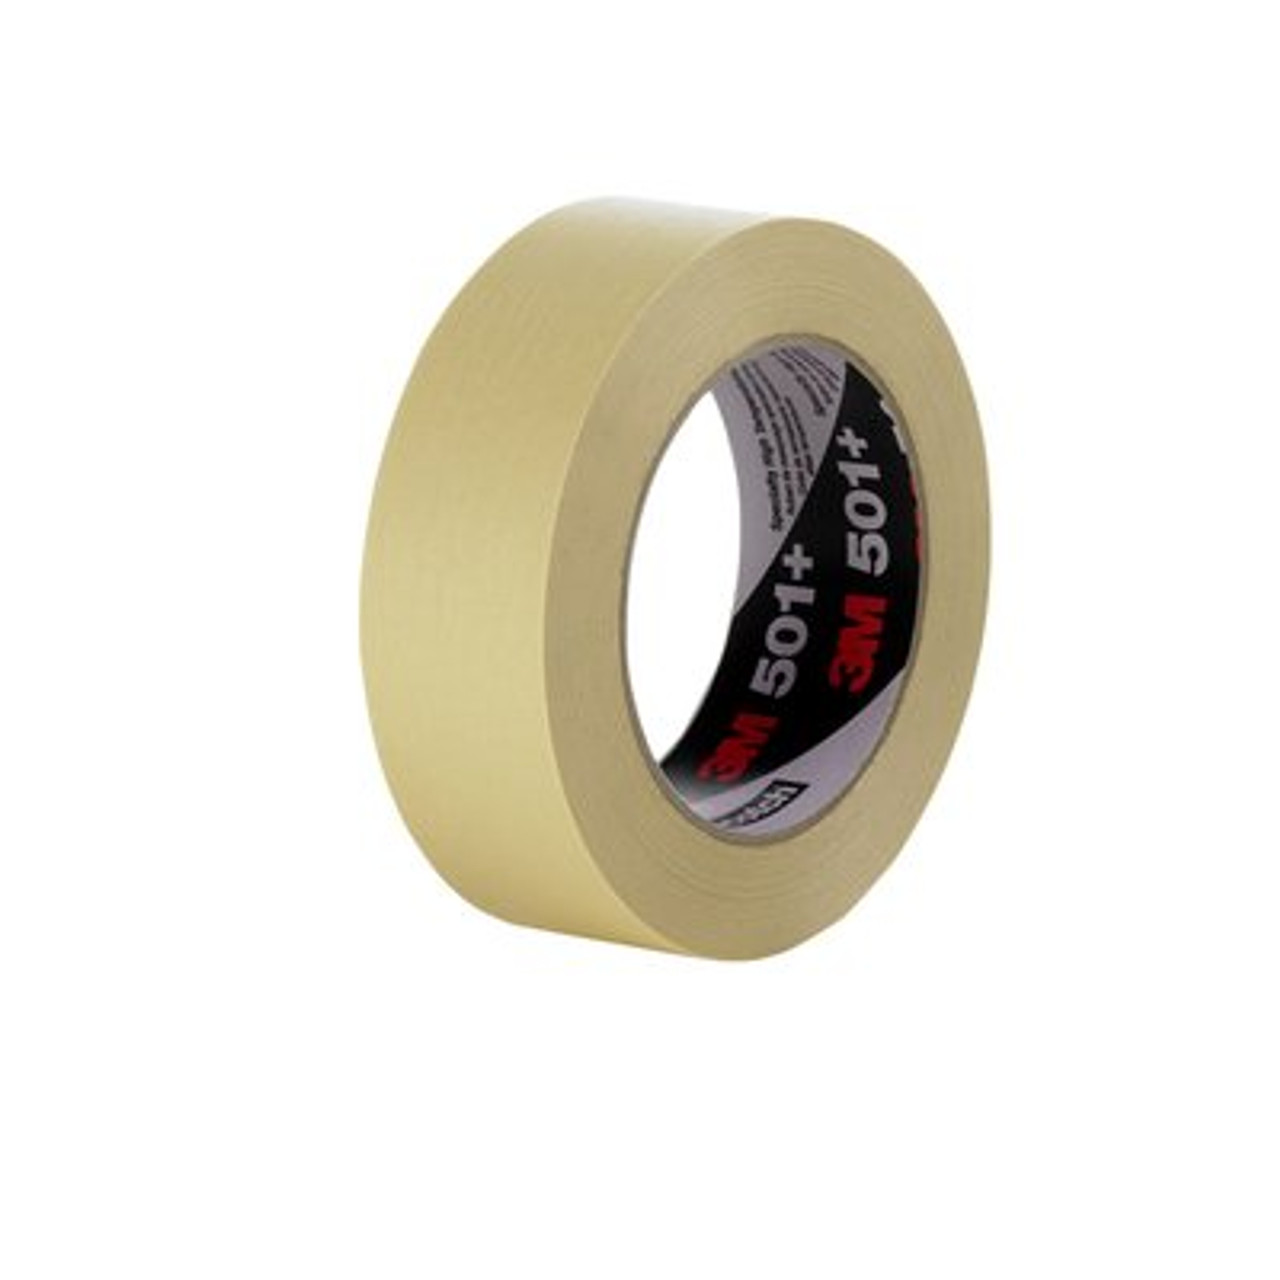 3M™ Specialty High Temperature Masking Tape 501+, Tan, 48 mm x 55 m IW